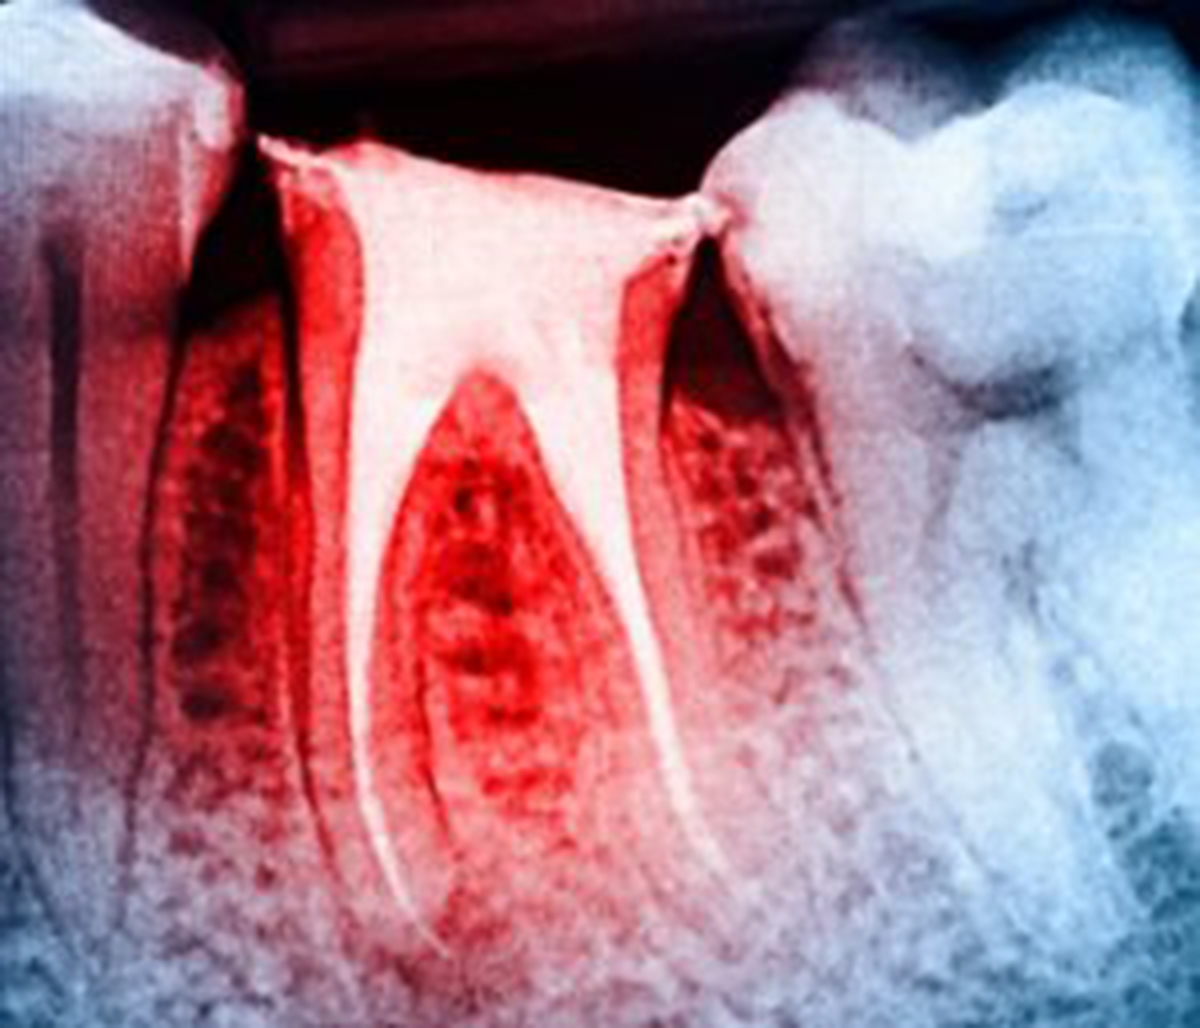 root canal treatment san francisco ca, root canal x-ray